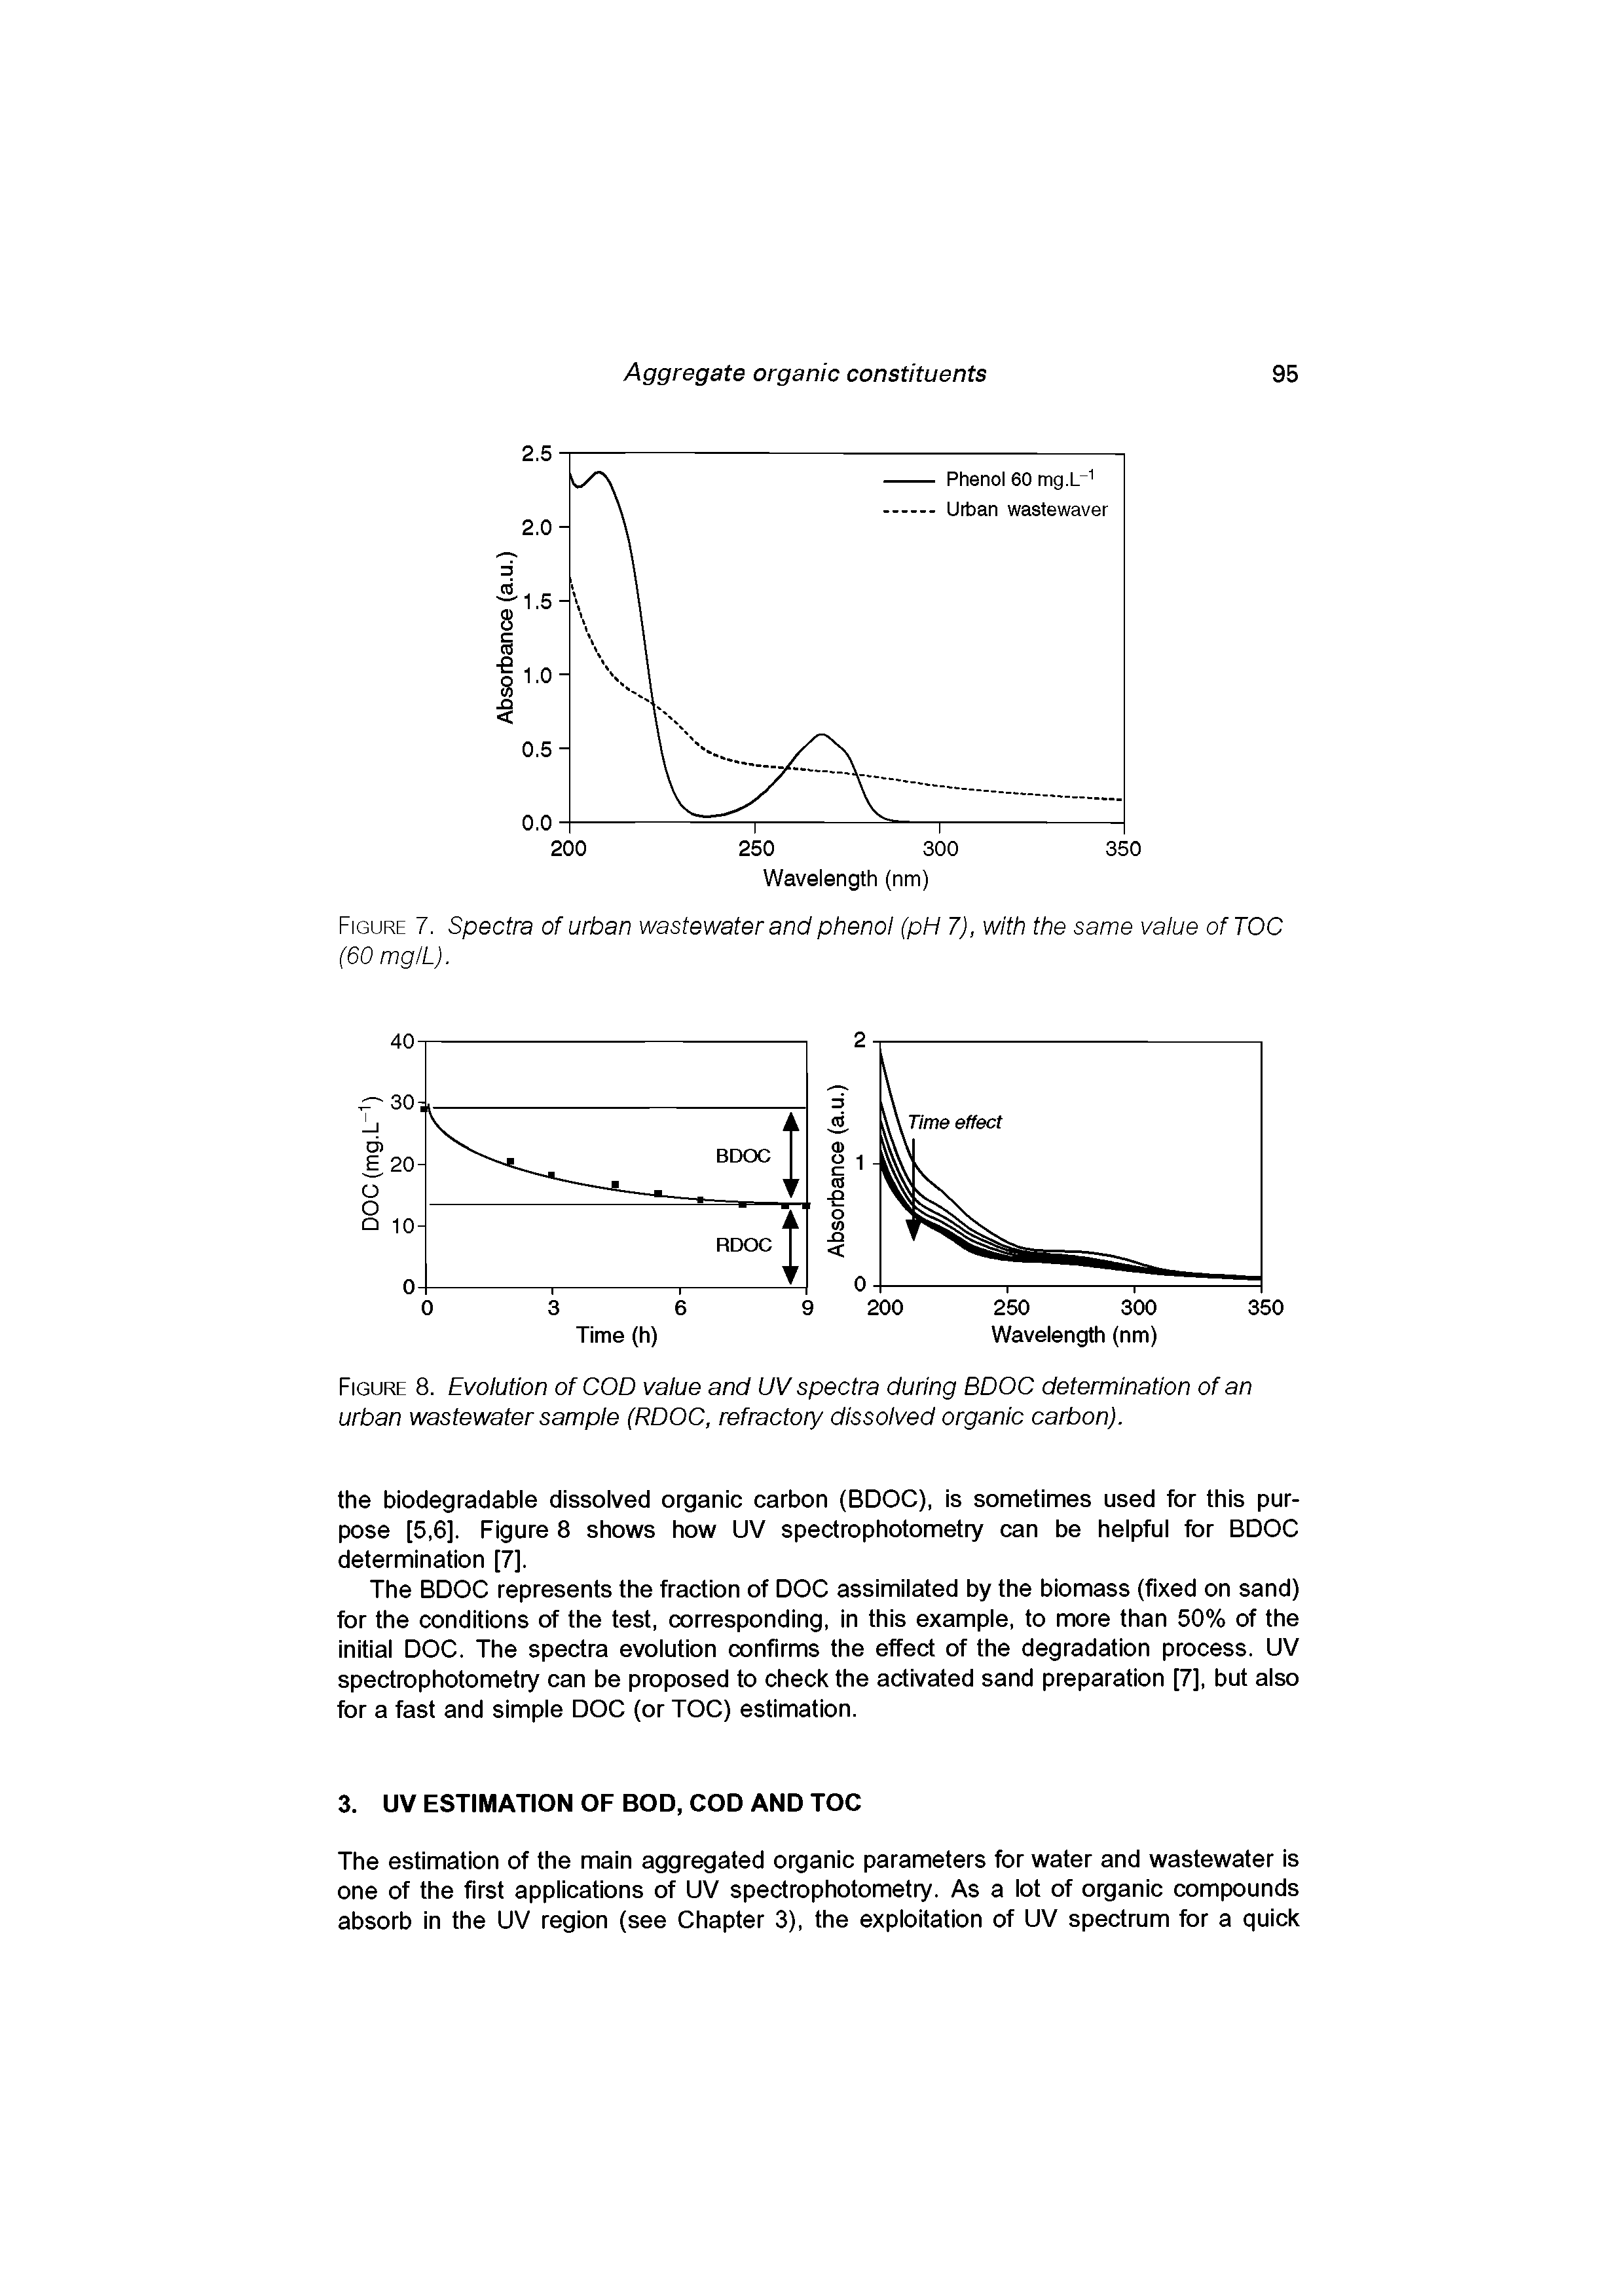 Figure 8. Evolution of COD value and UV spectra during BDOC determination of an urban wastewater sample (RDOC, refractory dissolved organic carbon).